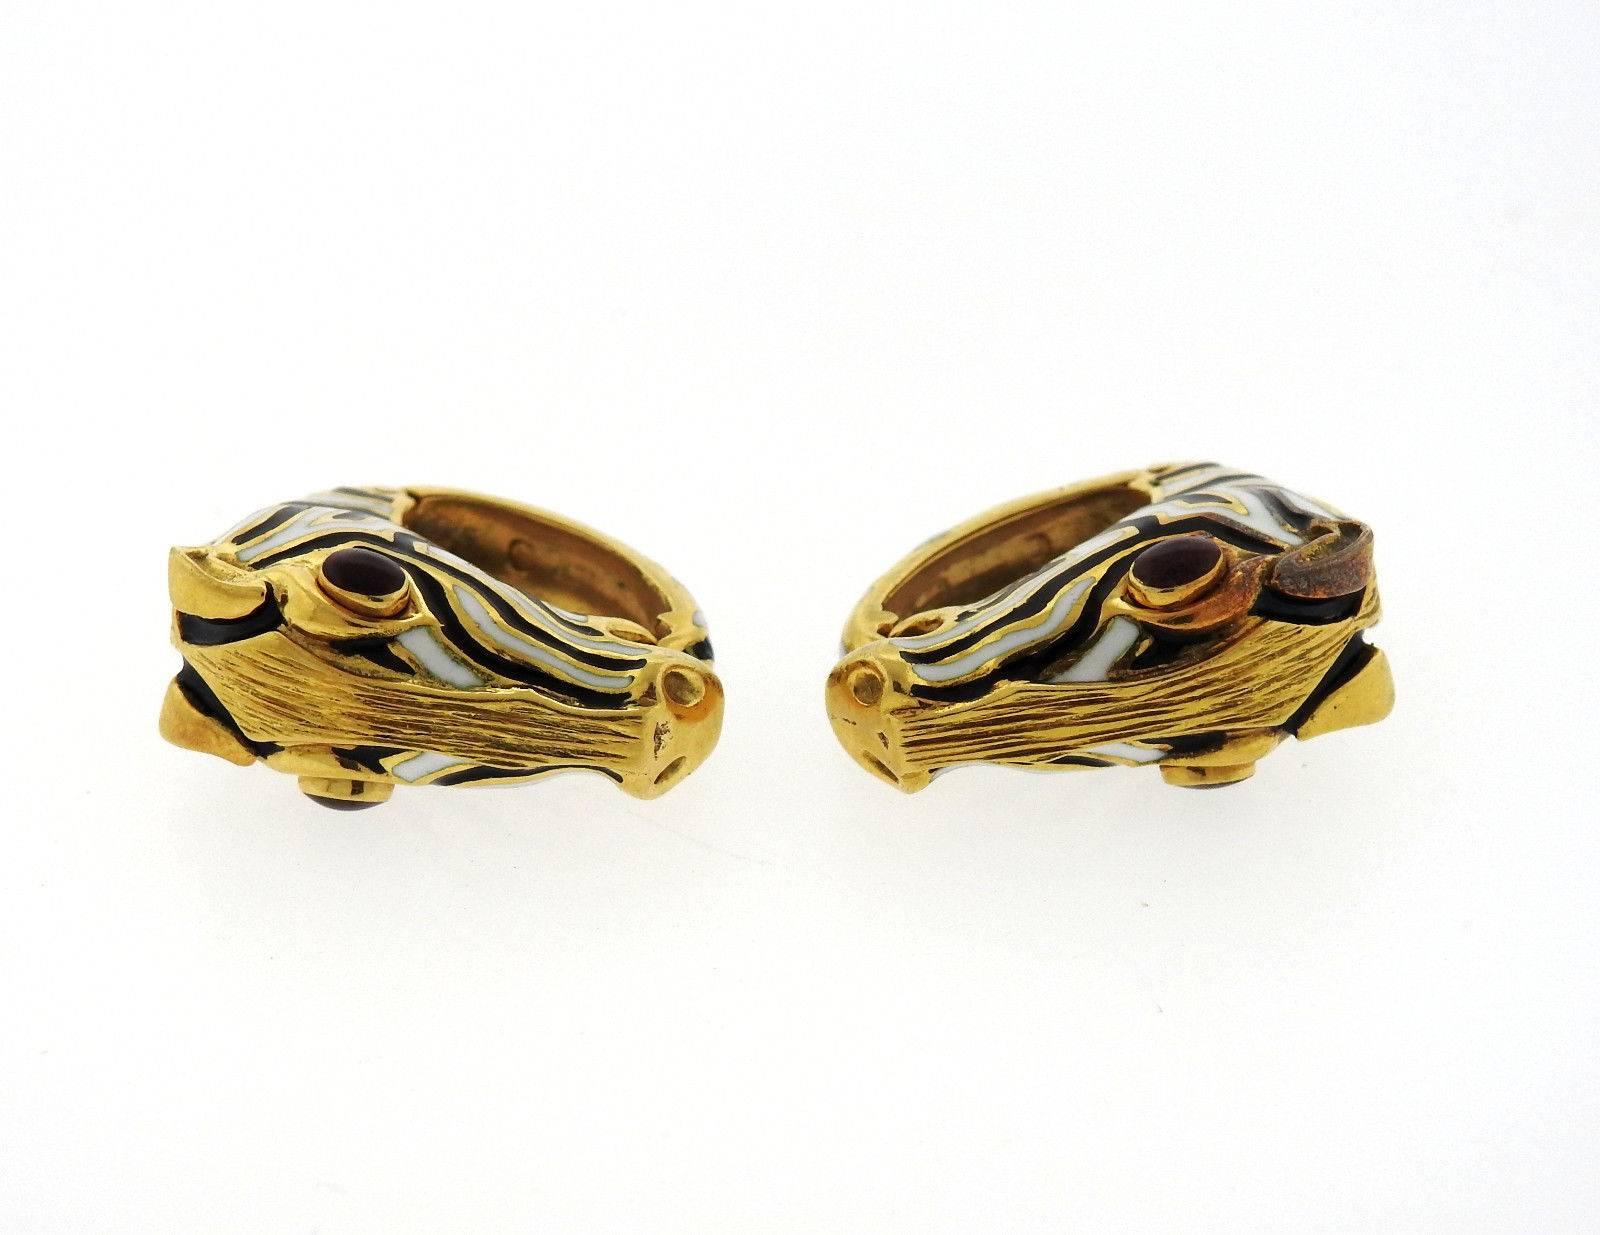 A pair of 18k yellow gold cufflinks set with ruby cabochons.  Each top (zebra head) measures 25mm x 12mm.  Marked: Webb 18k (partially visible).  The weight of the set is 30 grams.